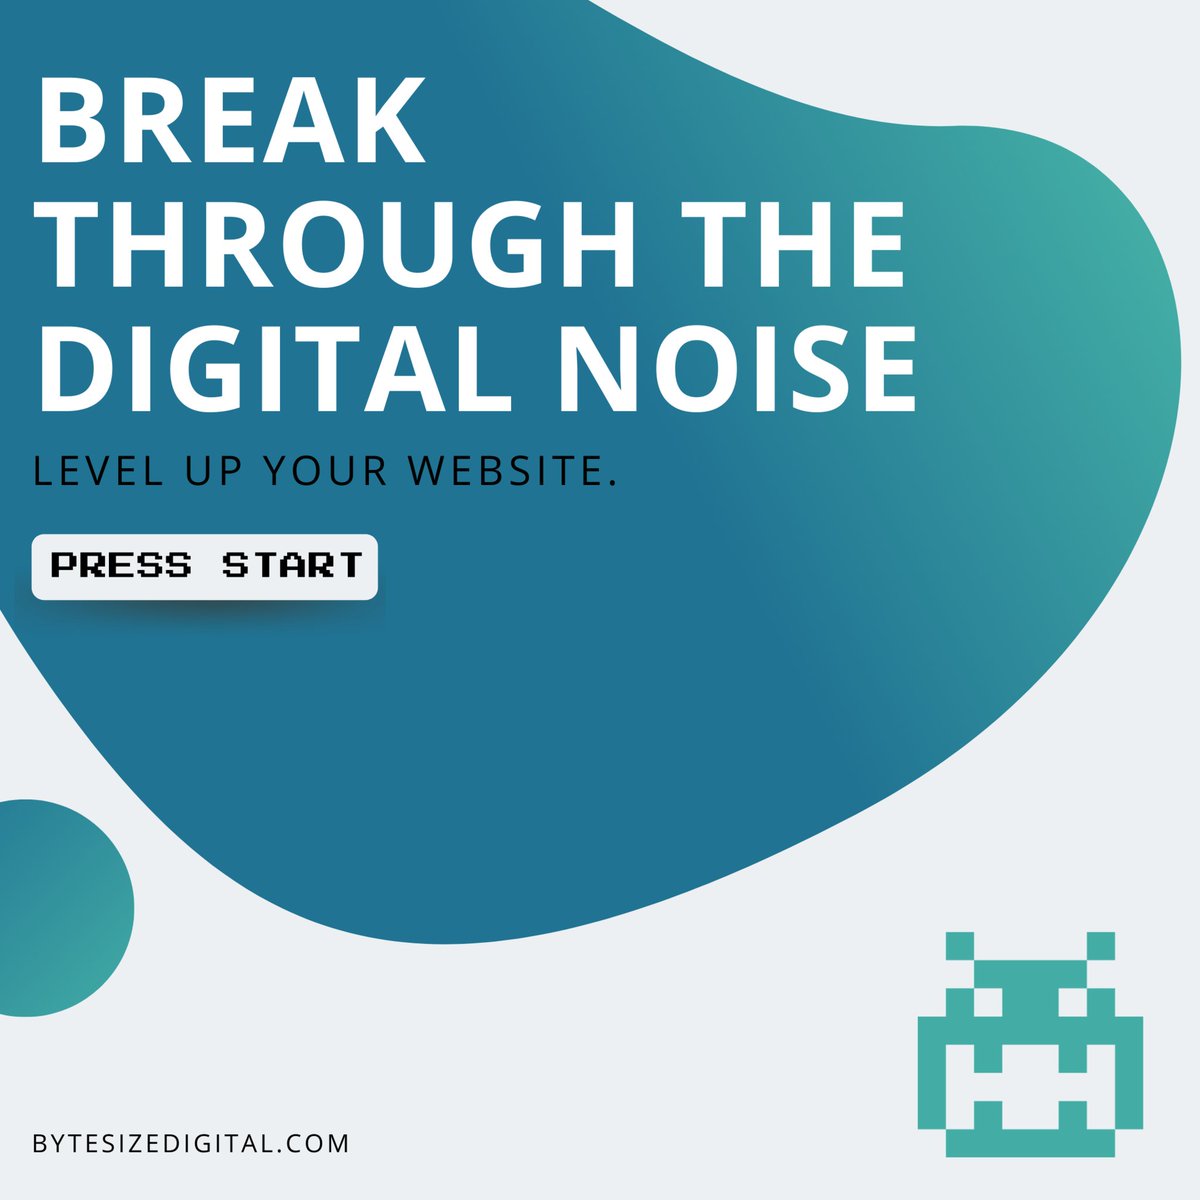 Break through the digital noise and level up your website! 

Is your website ready for a refresh? Let's chat! bytesizedigital.com 

#bytesizebuddies #bytesizedigital #builtbybytesize #webdesign #websitedesign #webdesigner #webdevelper  #marketing #marketingtips